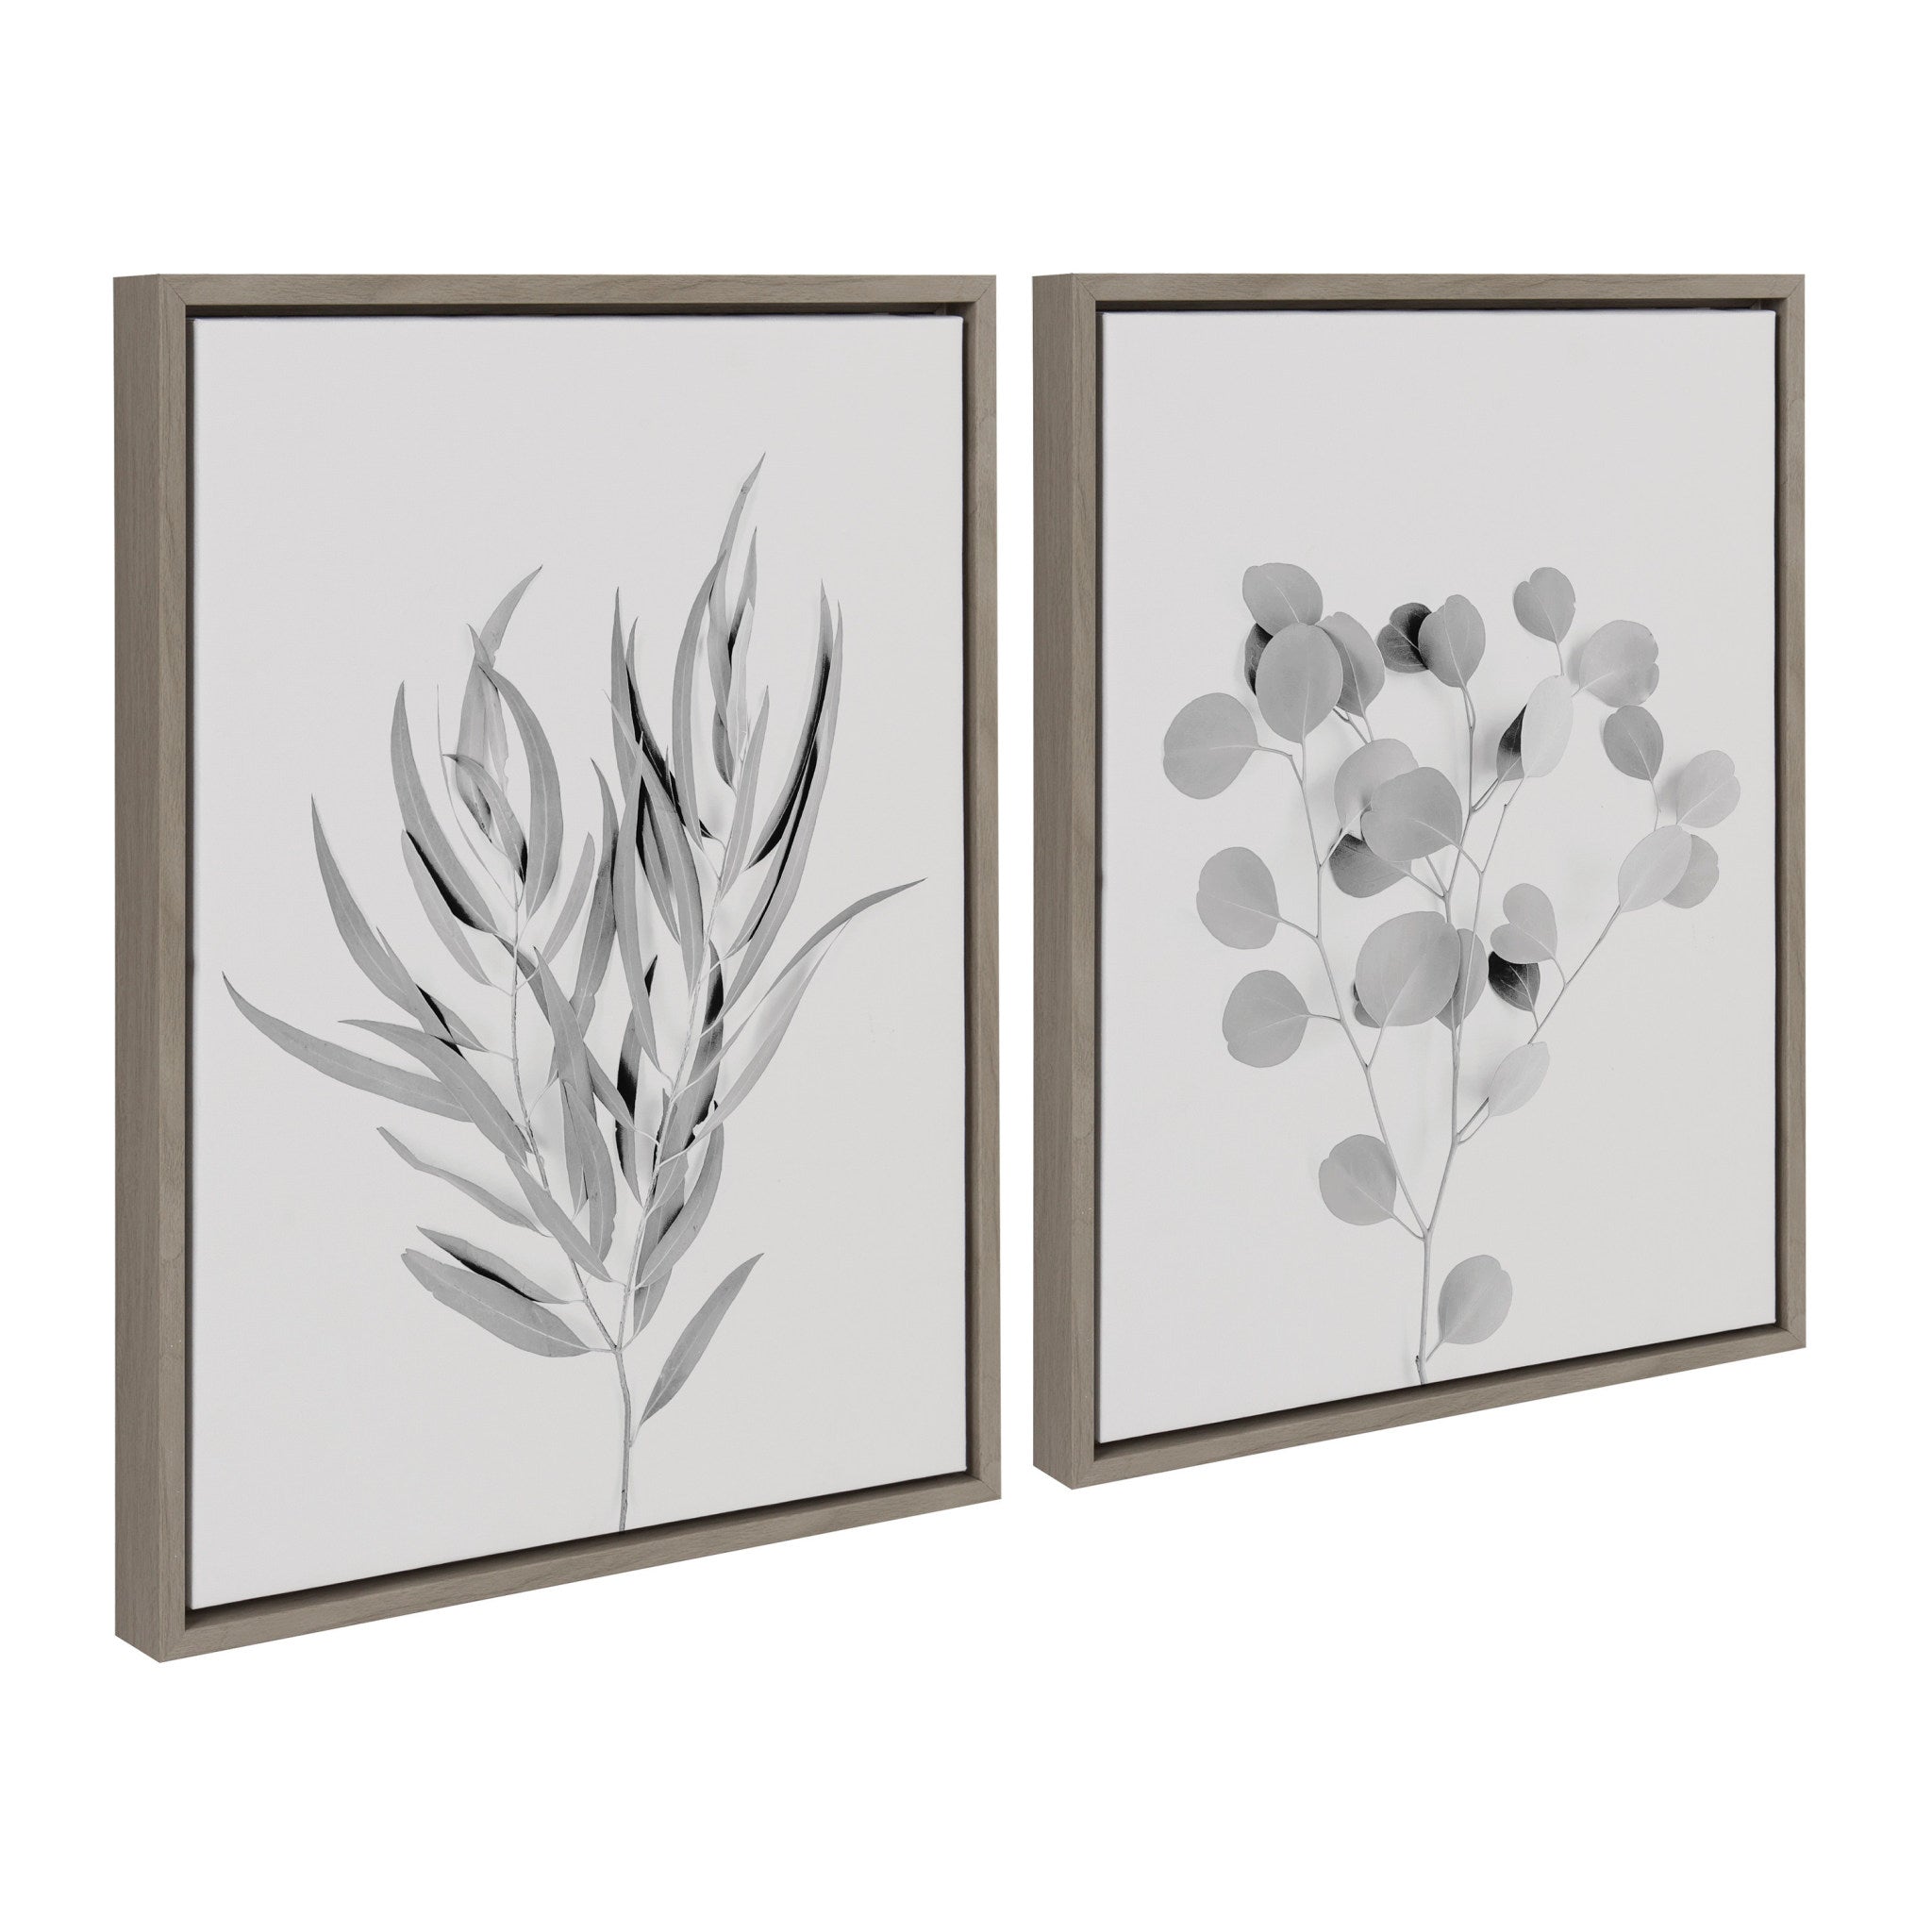 Sylvie Neutral Botanical 1 and 2 Soft White Framed Canvas by The Creative Bunch Studio